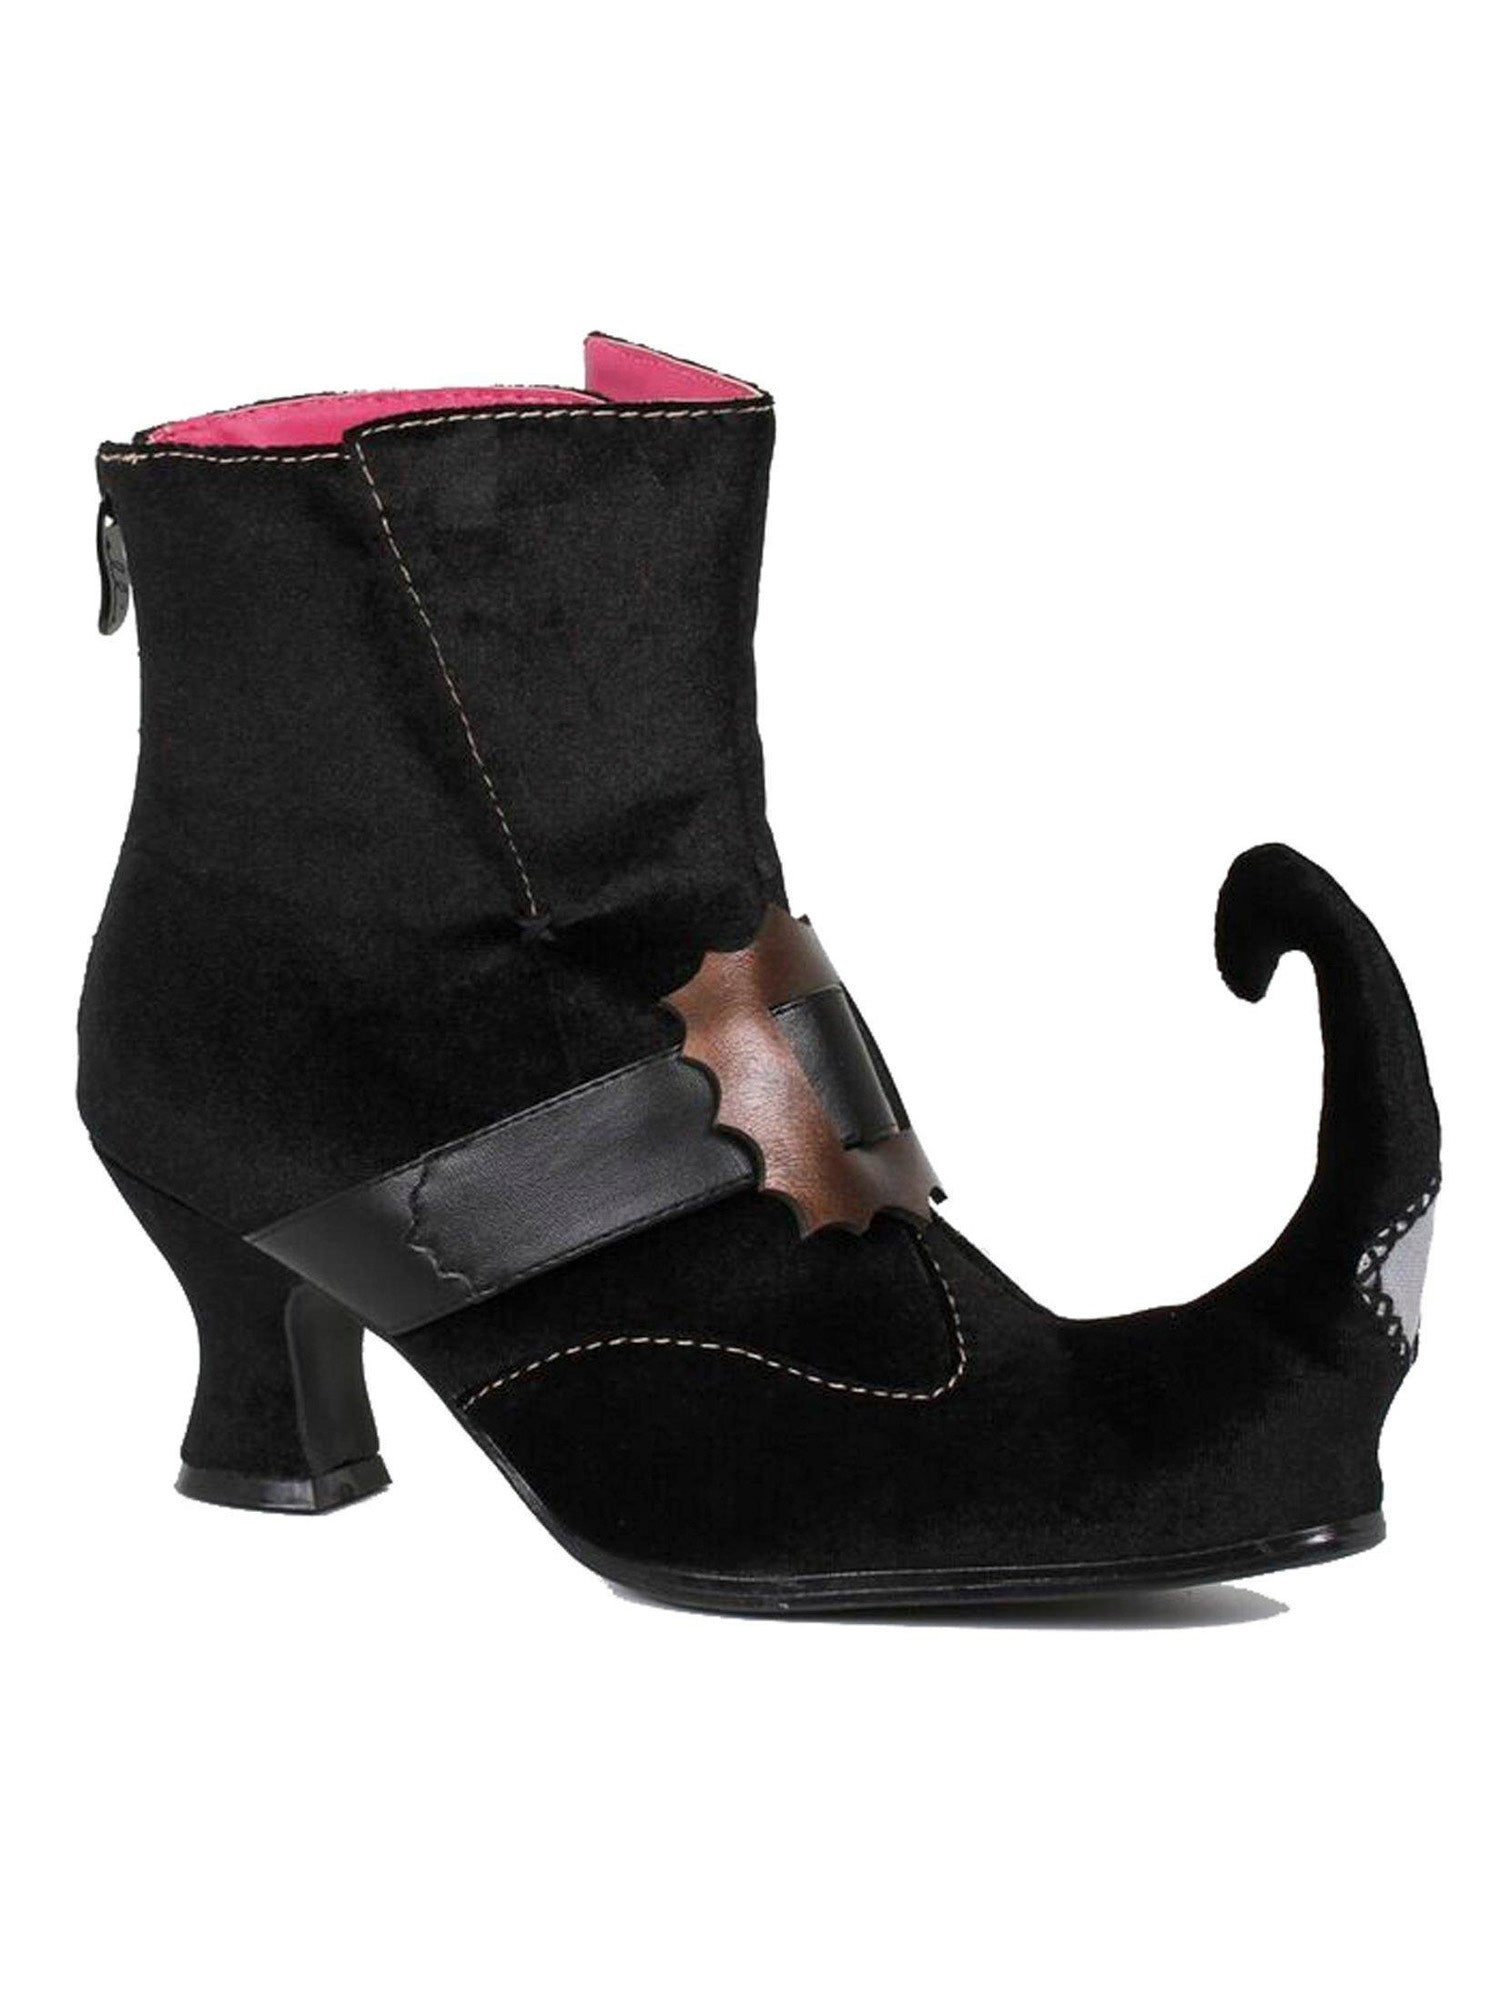 Women's Black Witch Boots with Buckle - costumes.com